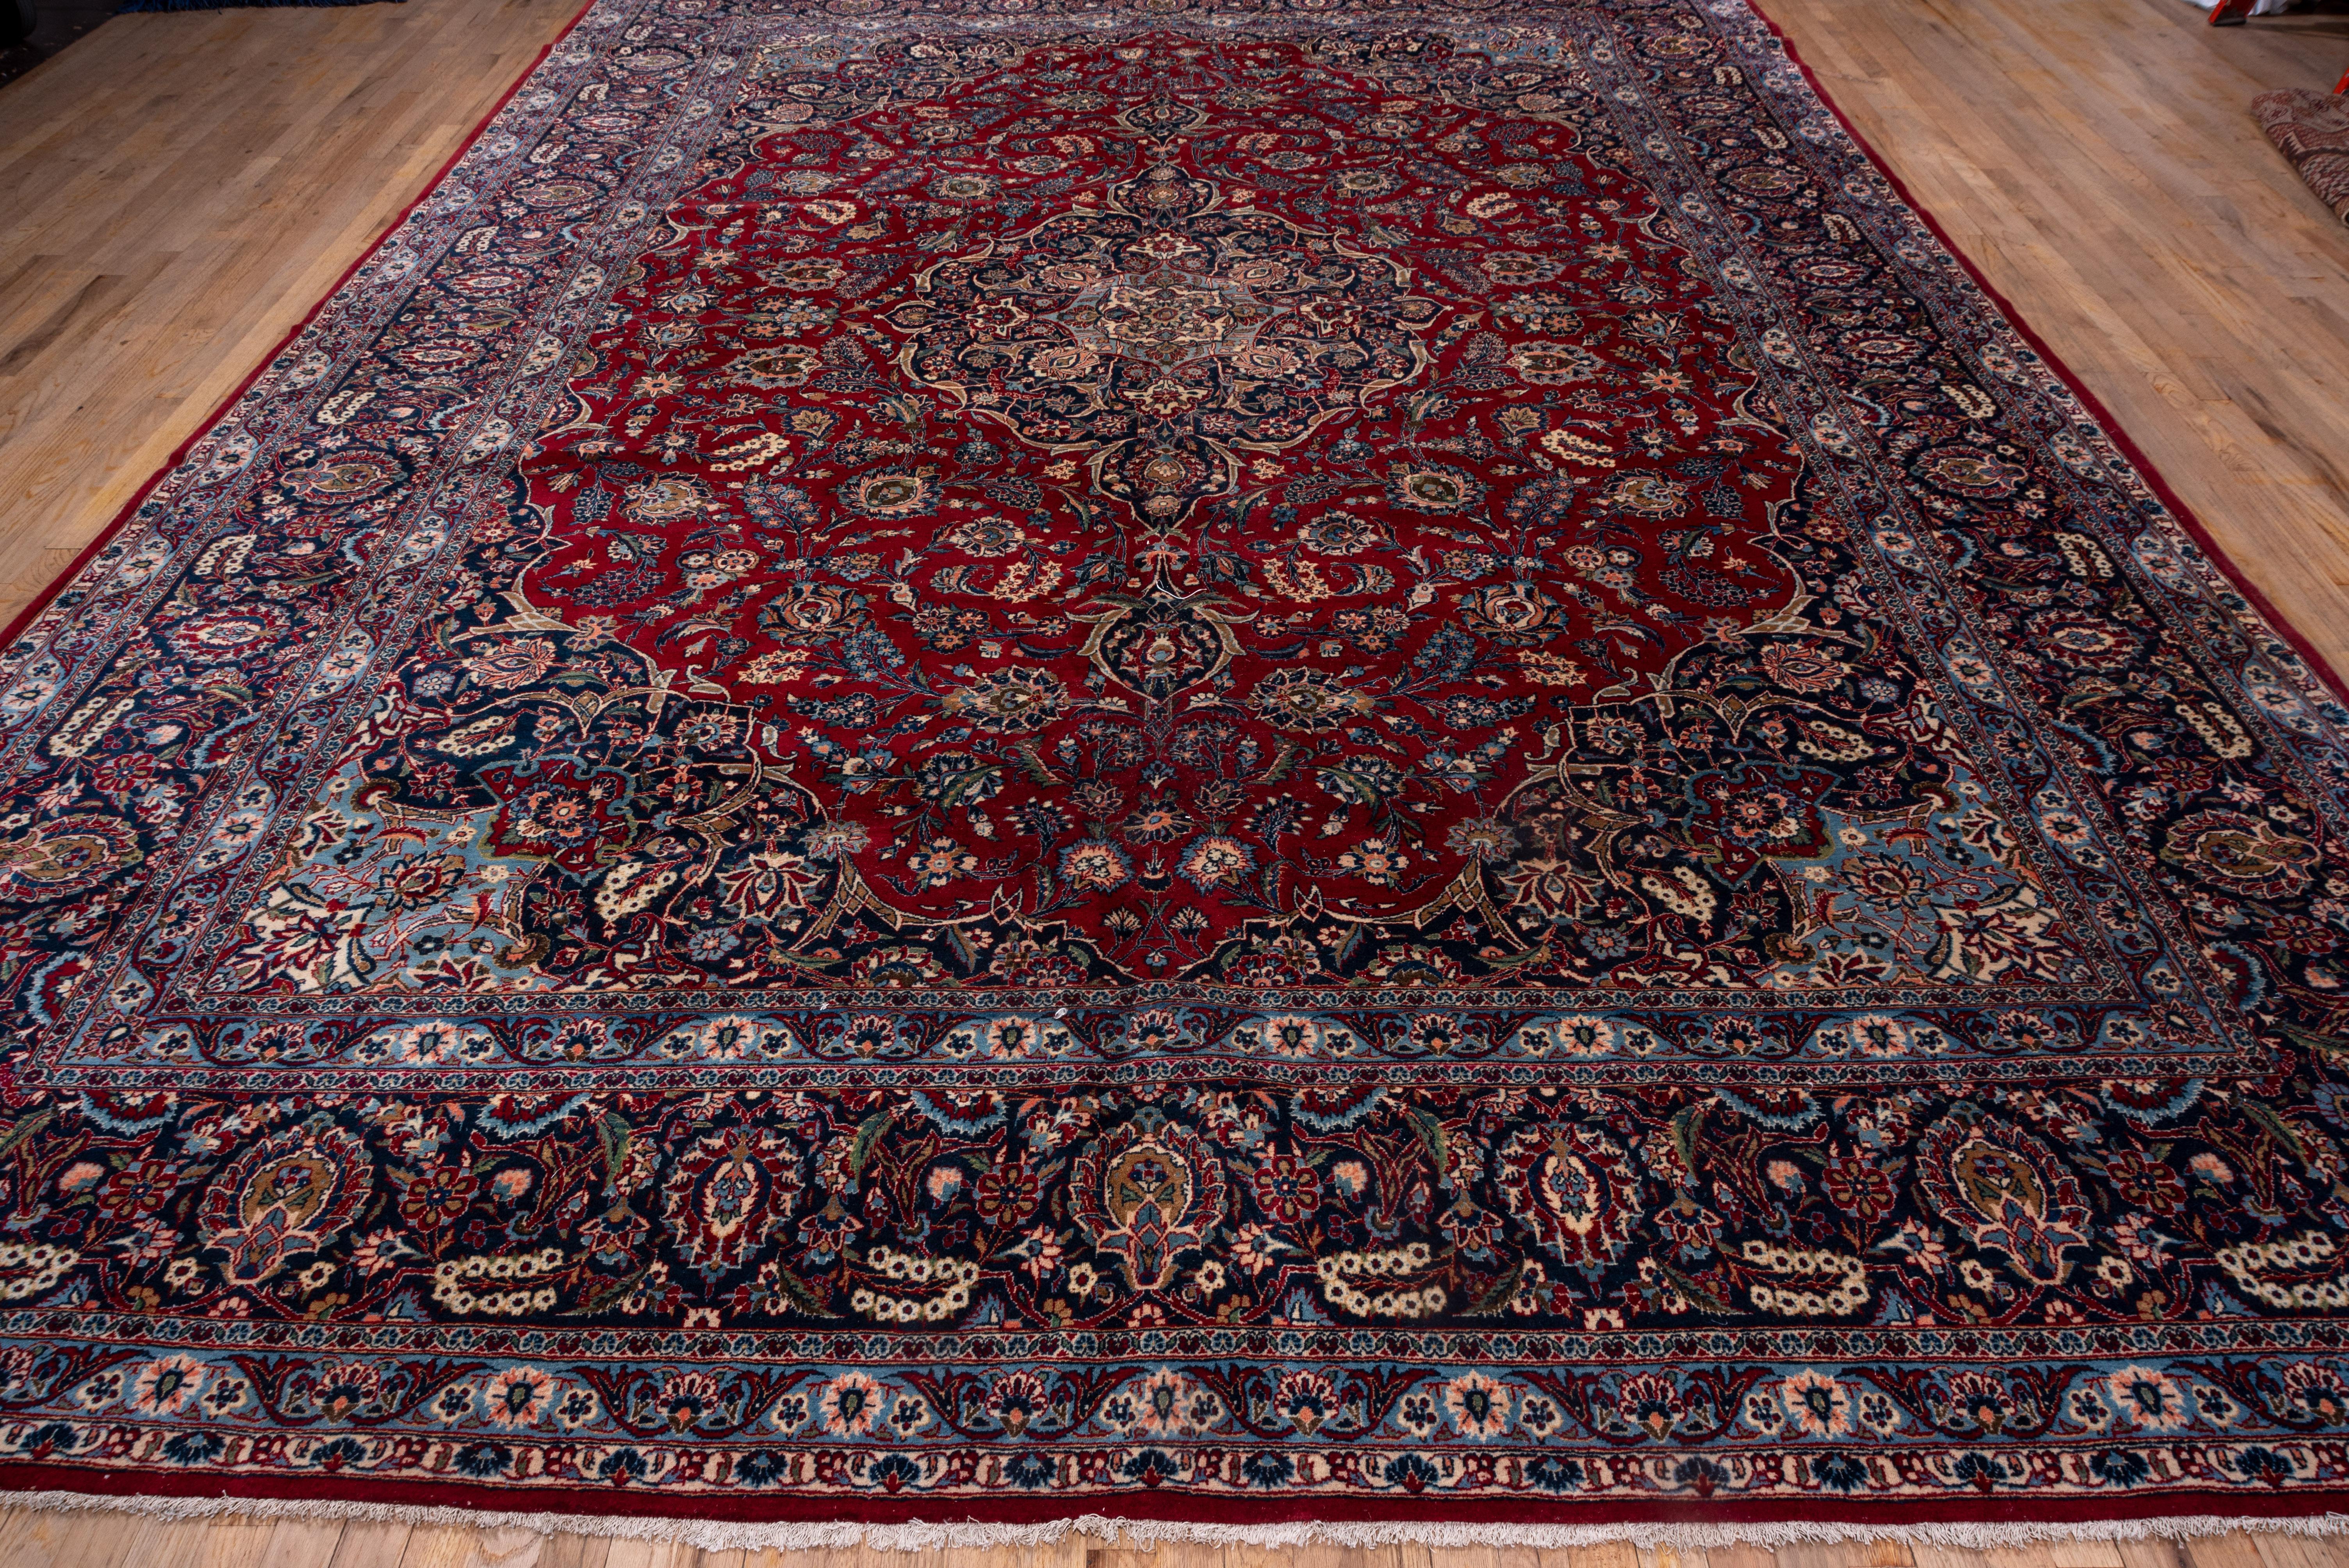 Hand-Knotted Antique Persian Kashan Carpet, Dark Red Field, Navy Borders, Baby Blue Accents For Sale